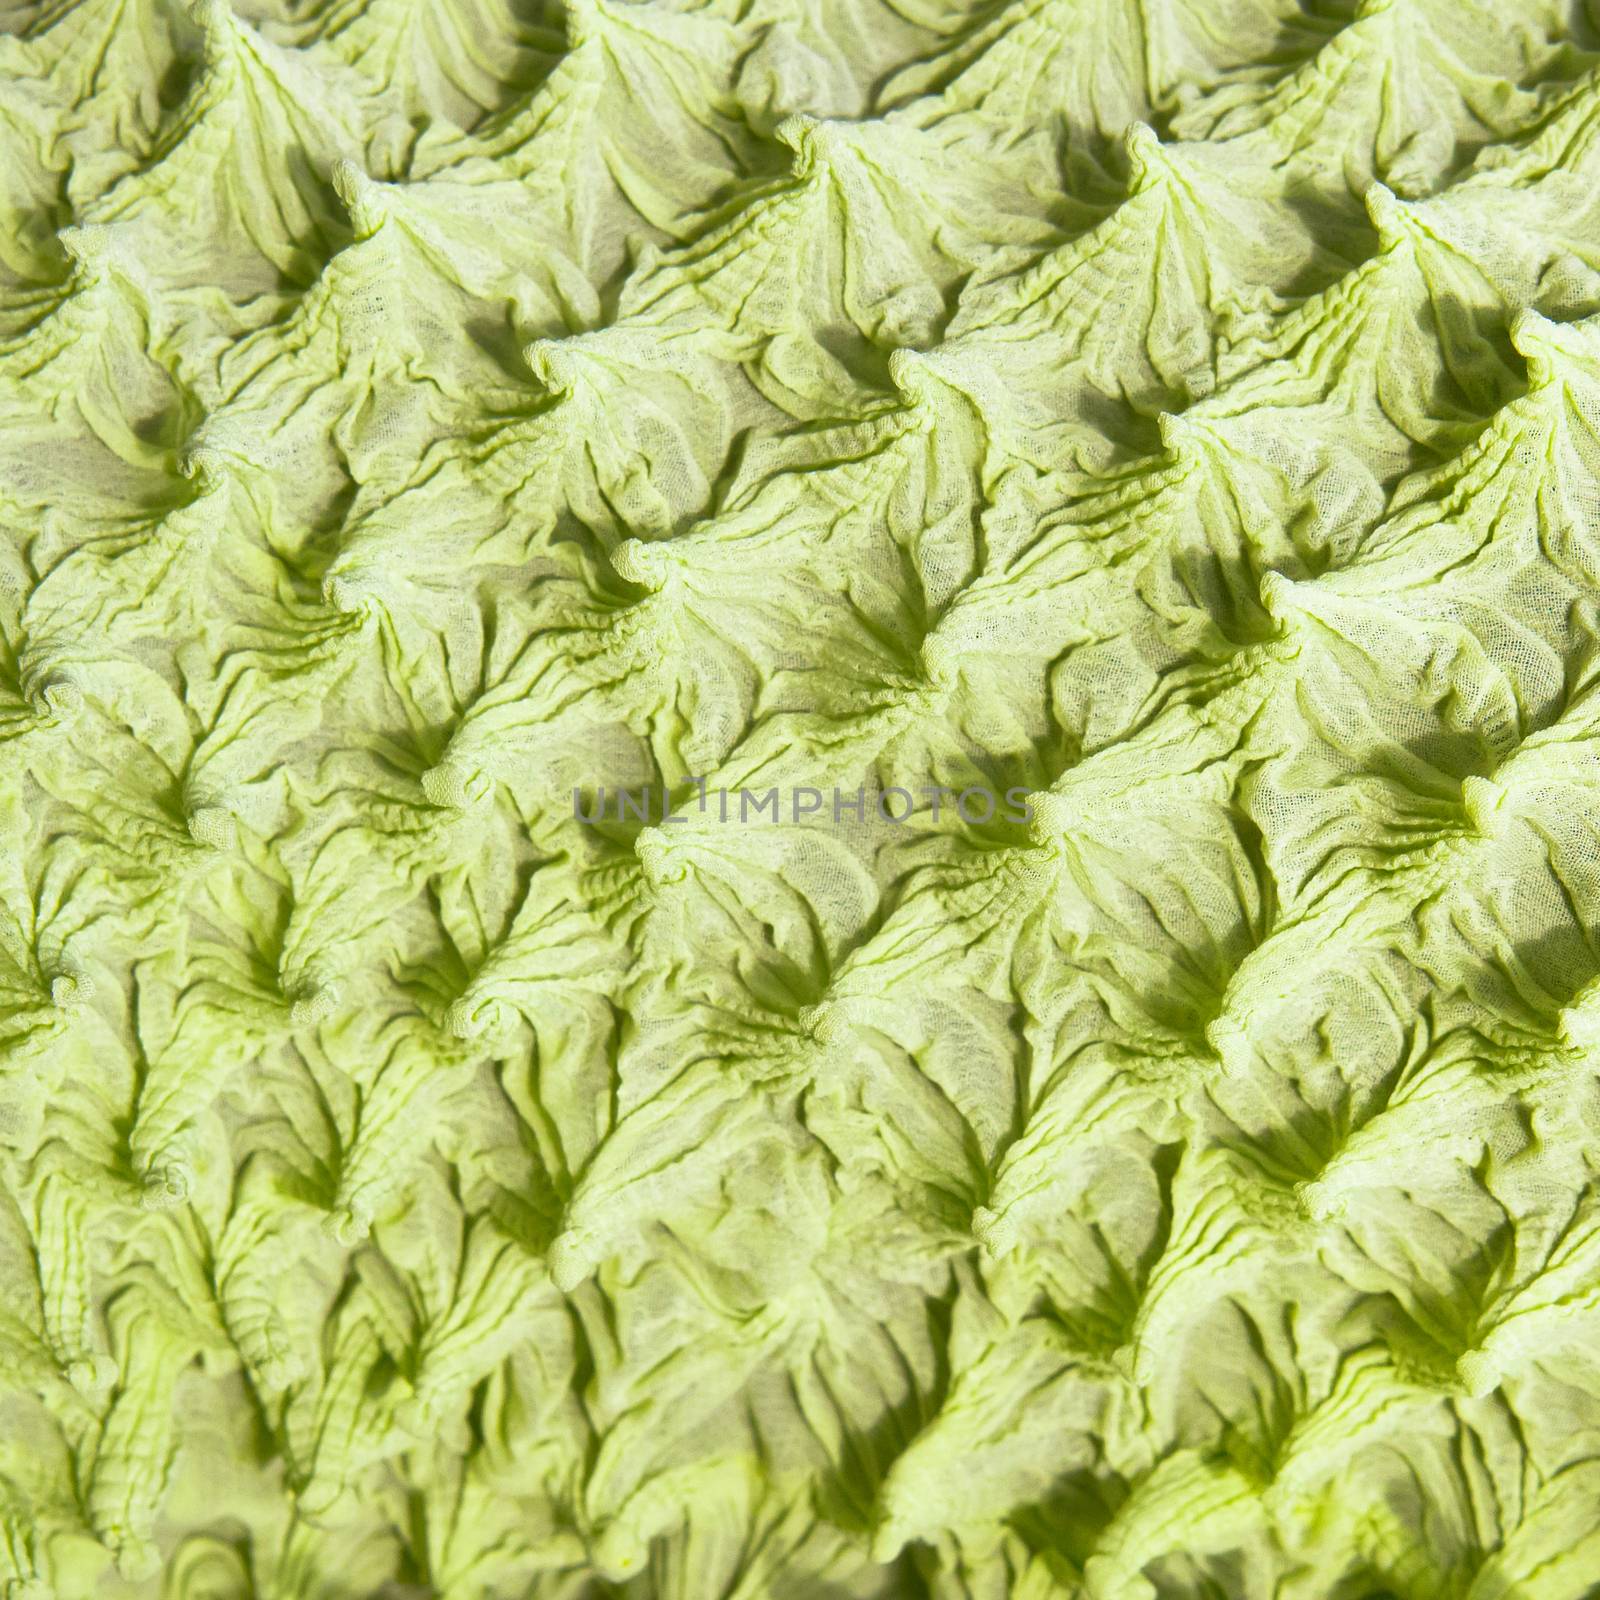 Part of a textured green fabric as a background